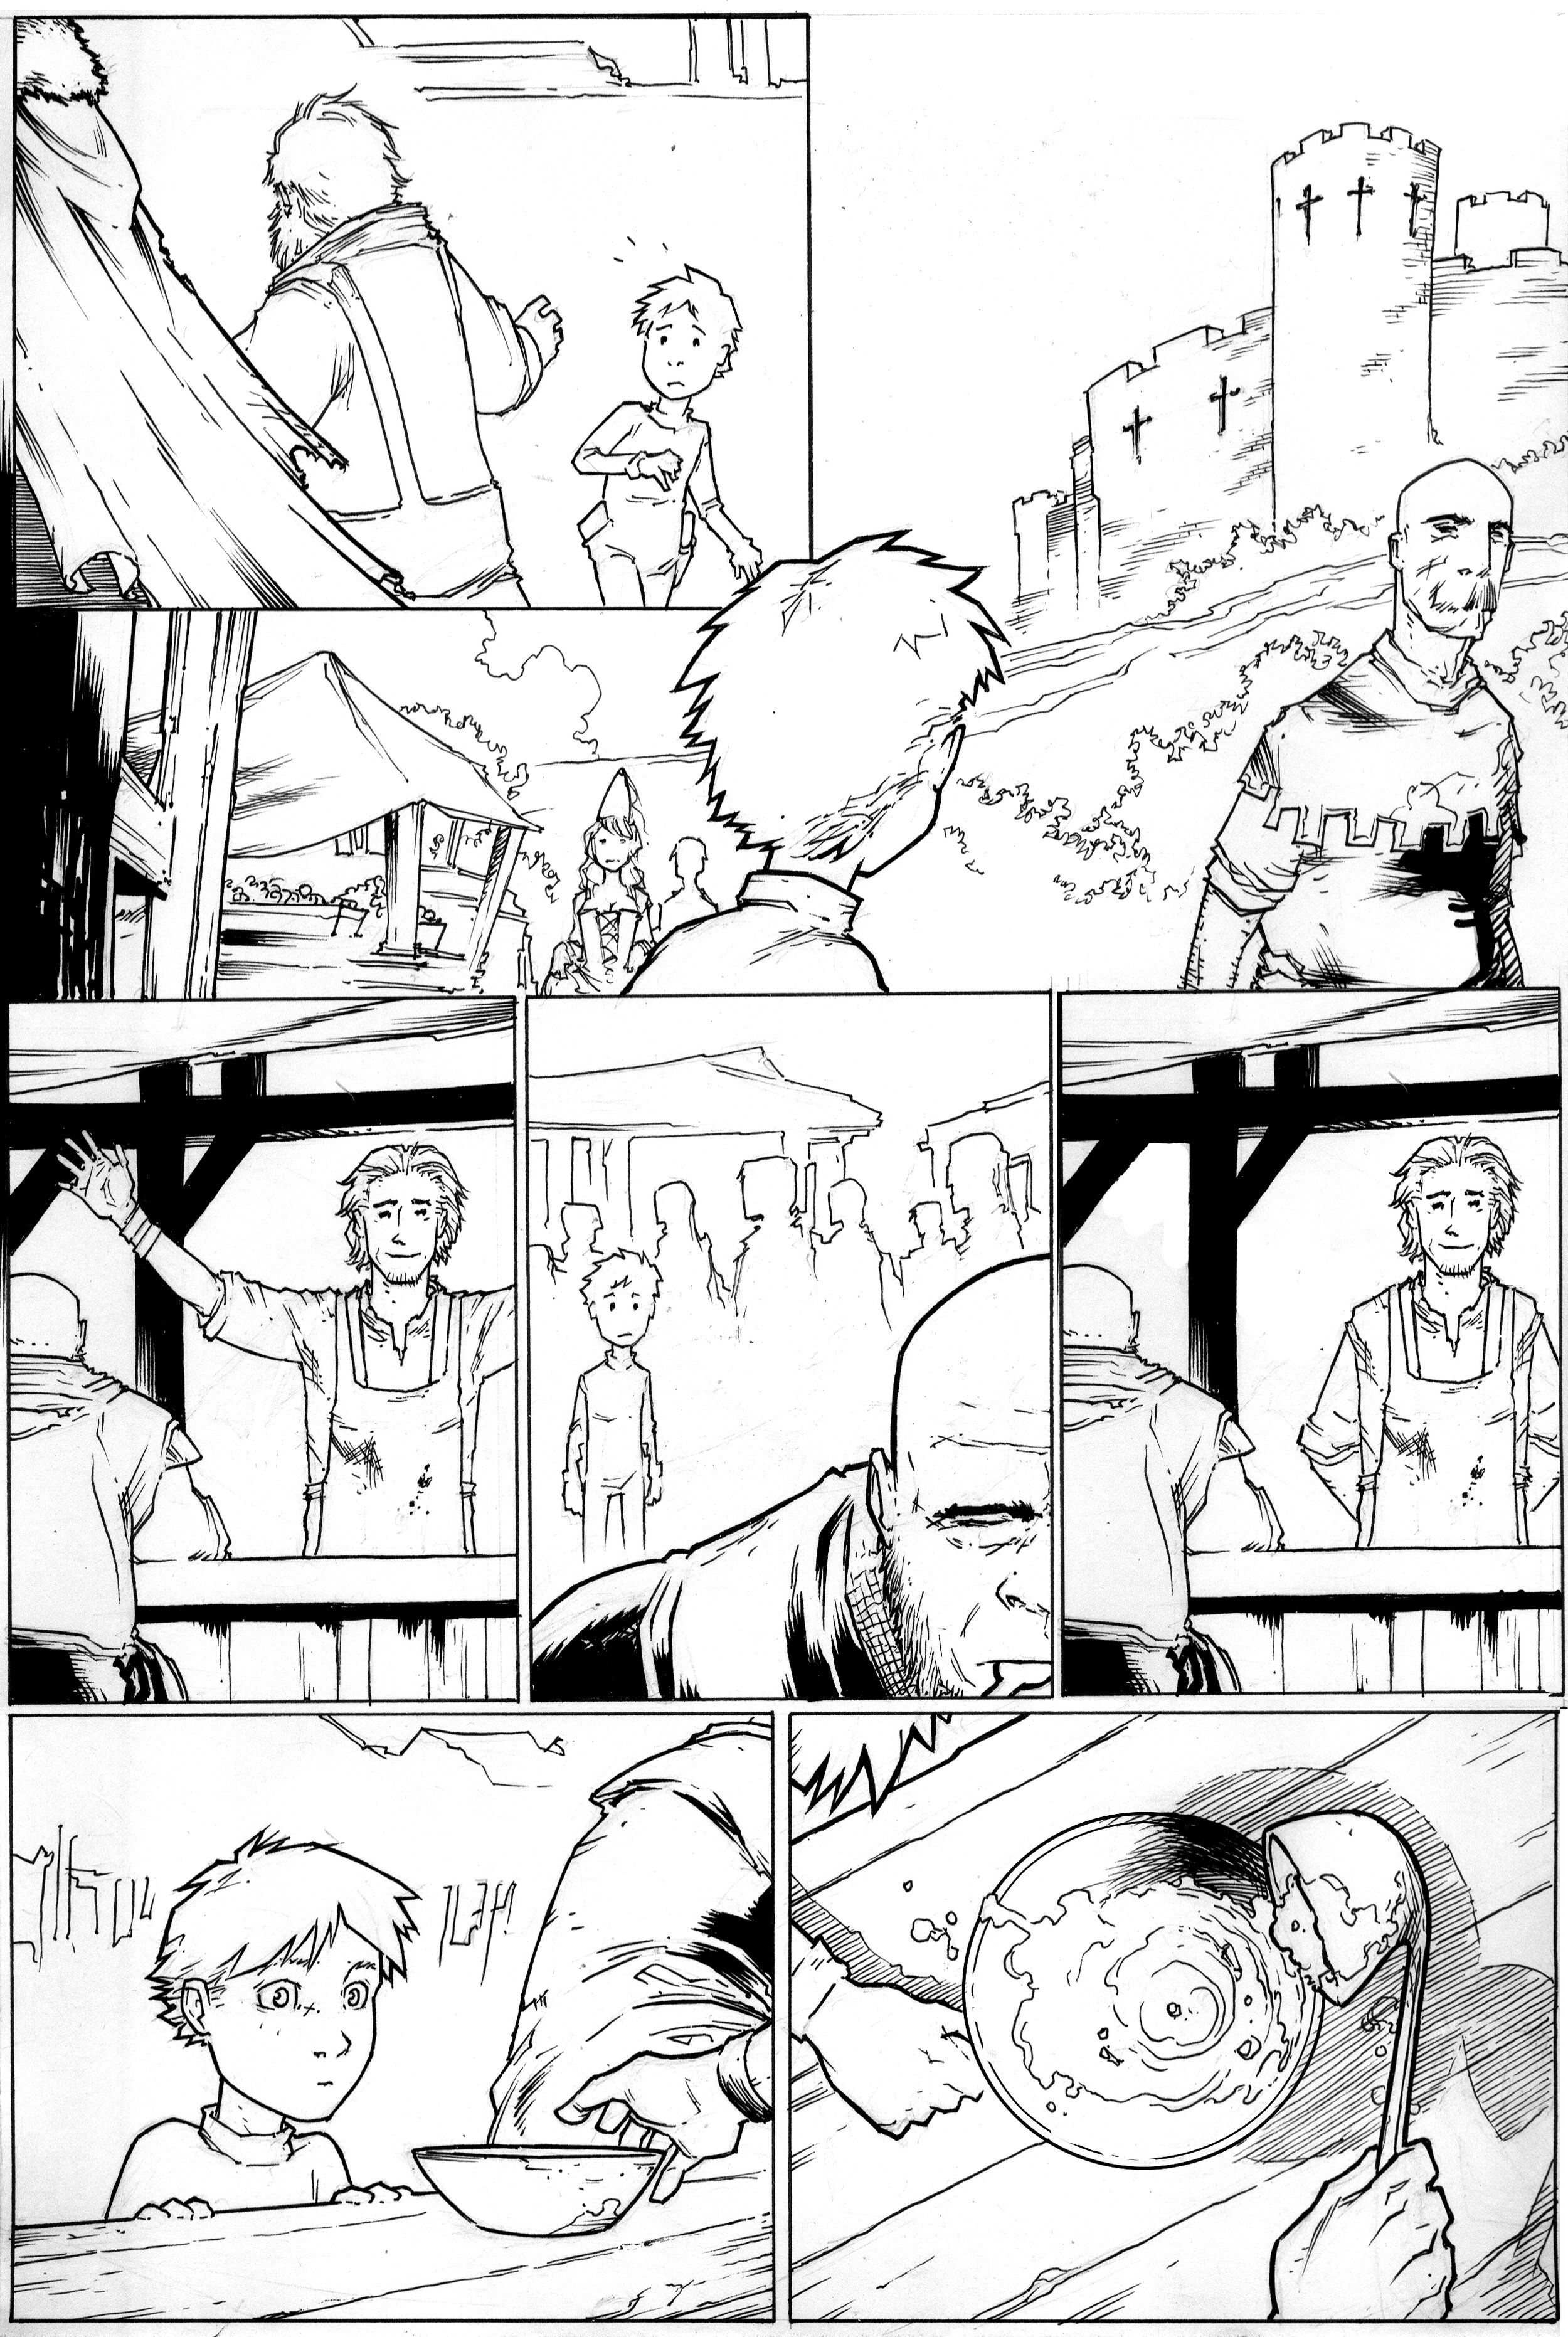 CW issue2 page15.jpg